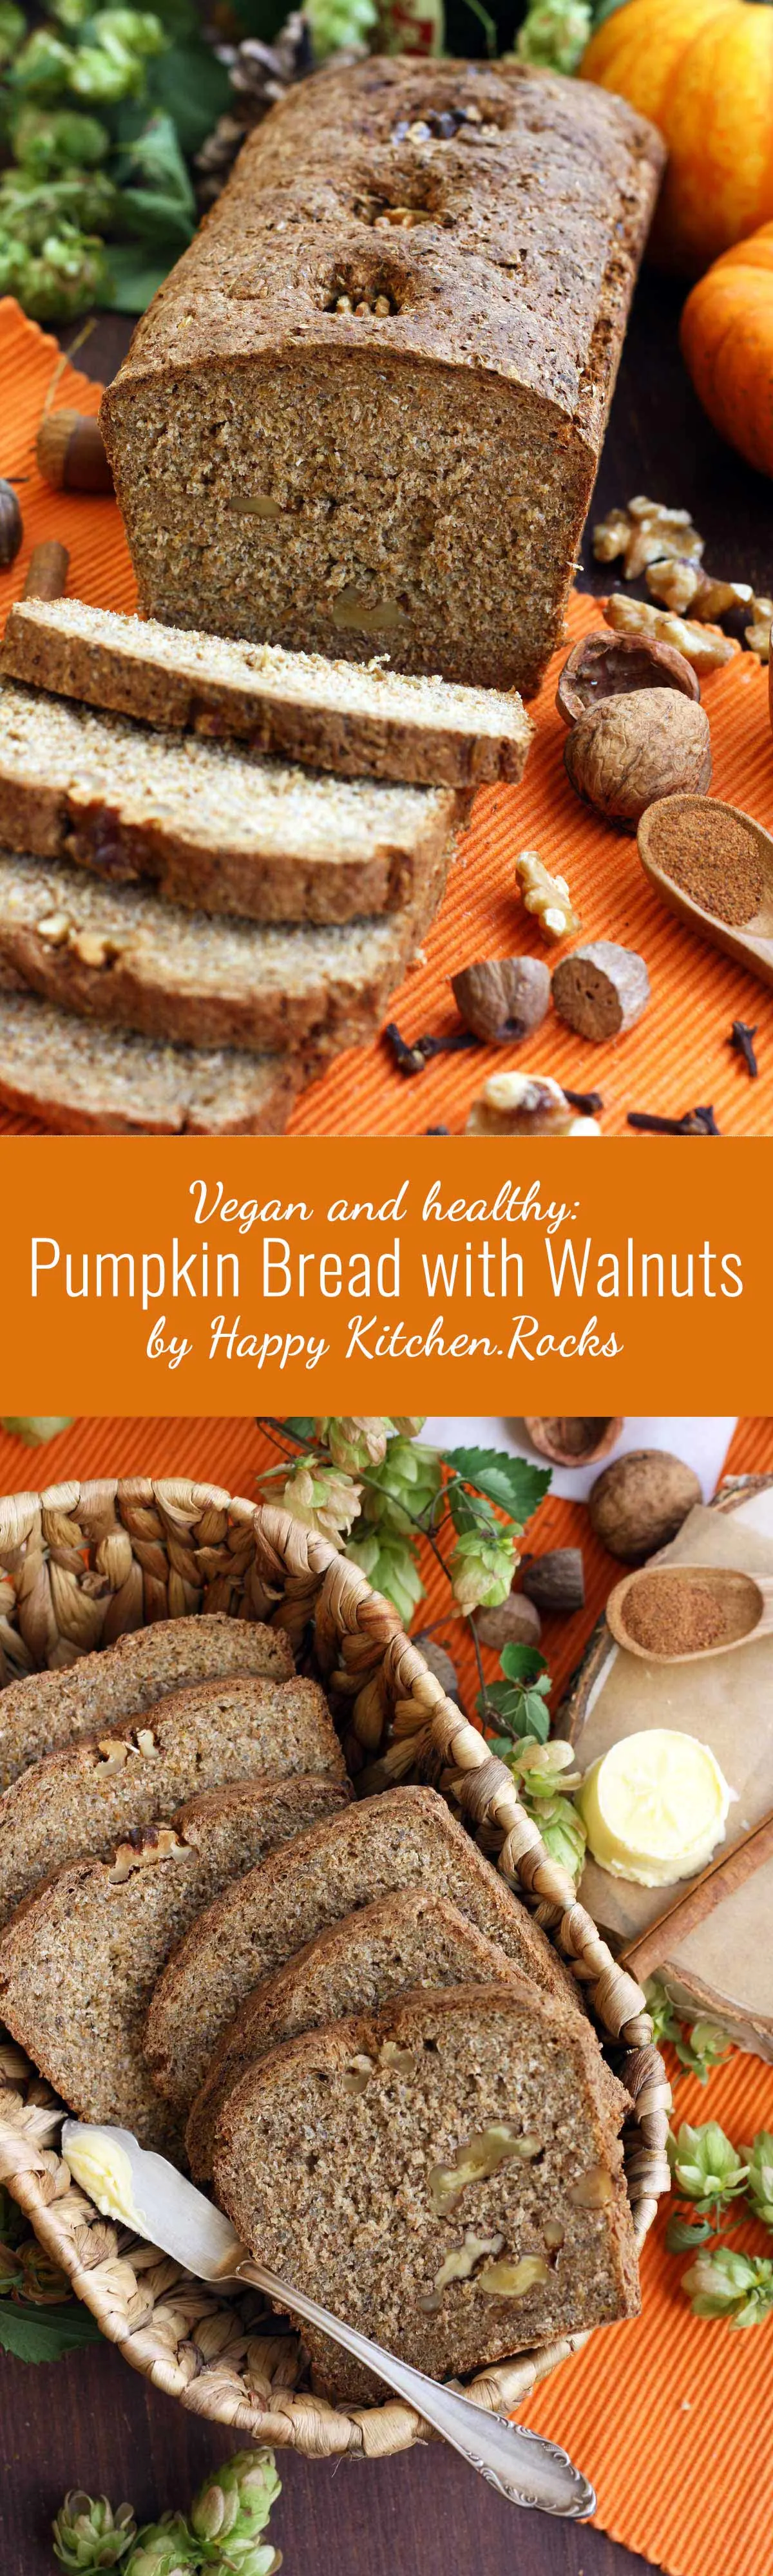 Healthy Pumpkin Bread with Walnuts - Super Long Collage of Two Images and Text Overlay